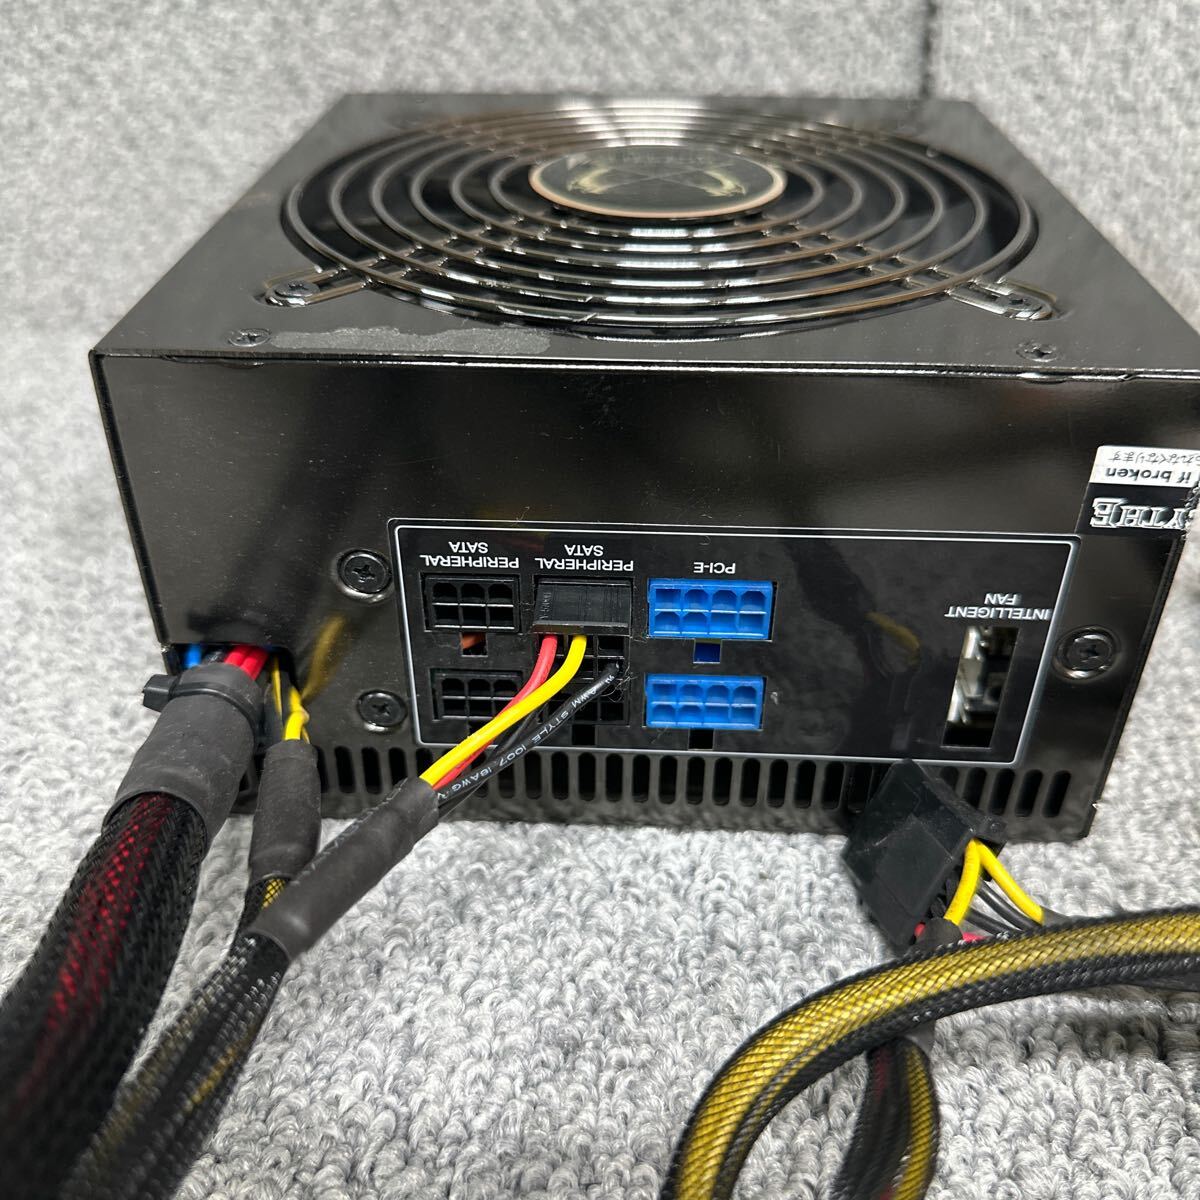 GK super-discount BOX-221 PC power supply BOX SCYTHE Gou power 2 PLUG-IN GOURIKI2-P-600A 600W power supply unit voltage has confirmed secondhand goods 